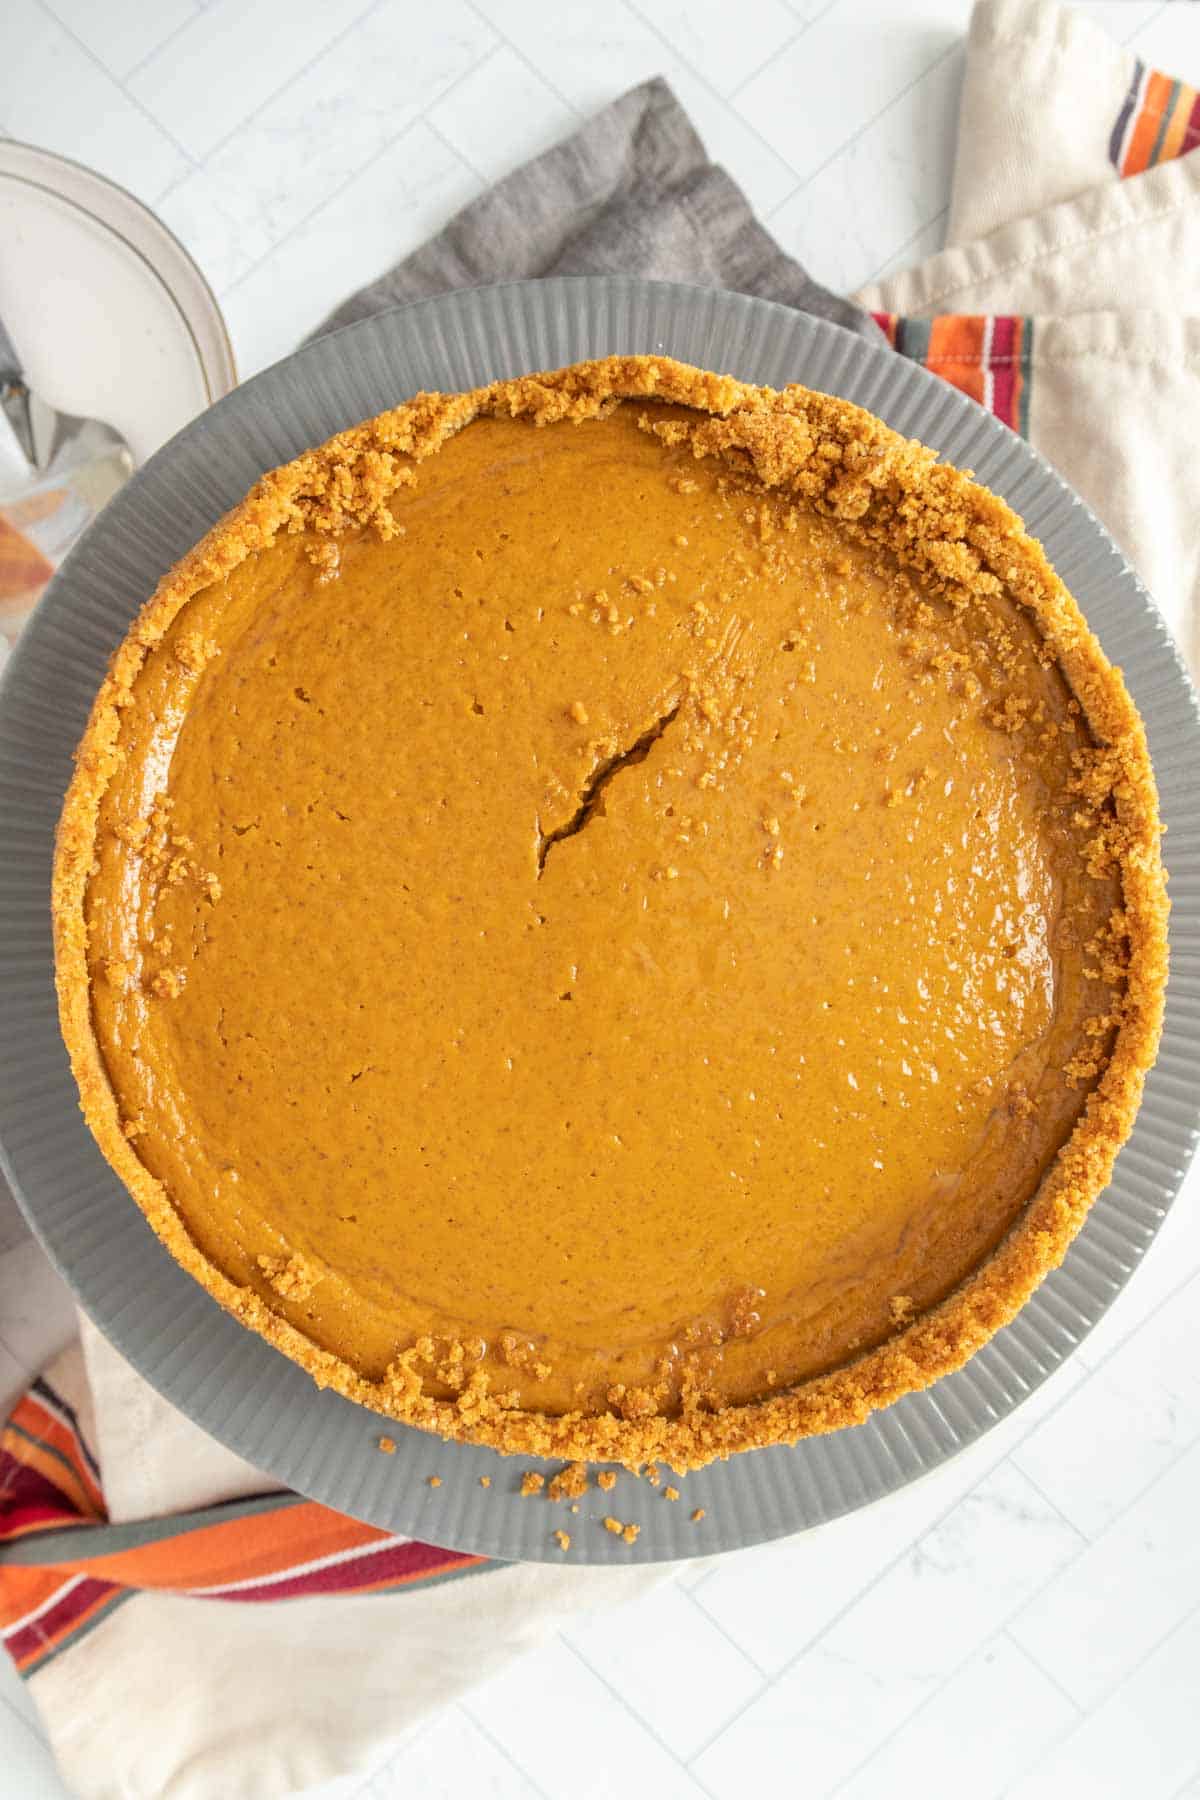 A pumpkin pie on a plate with a fork.